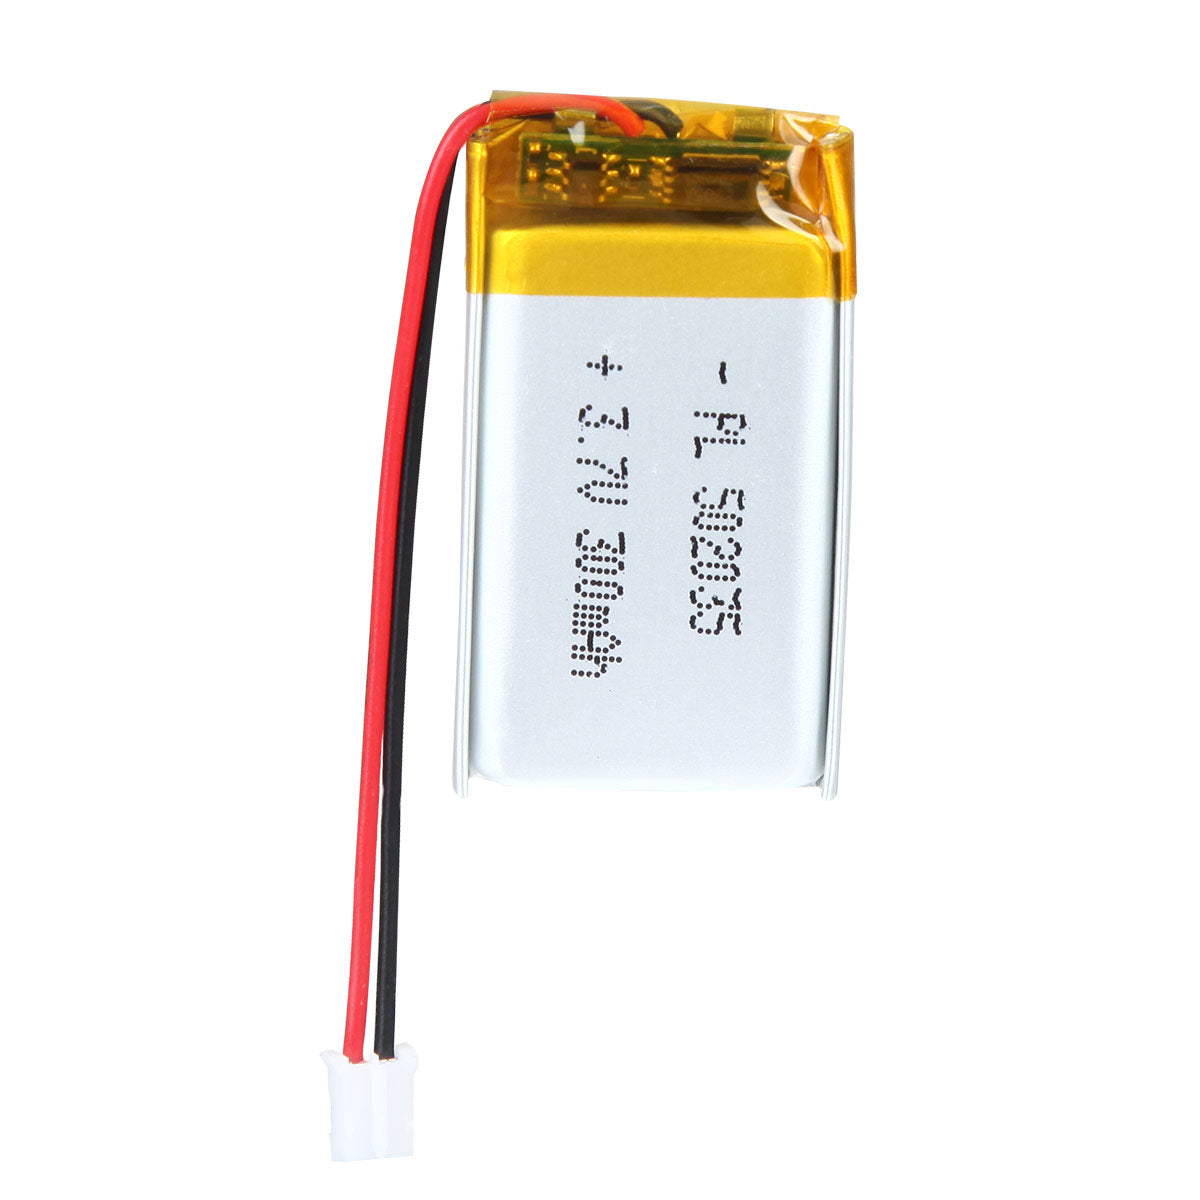 YDL 3.7V 300mAh 502035 Rechargeable Lithium  Polymer Battery